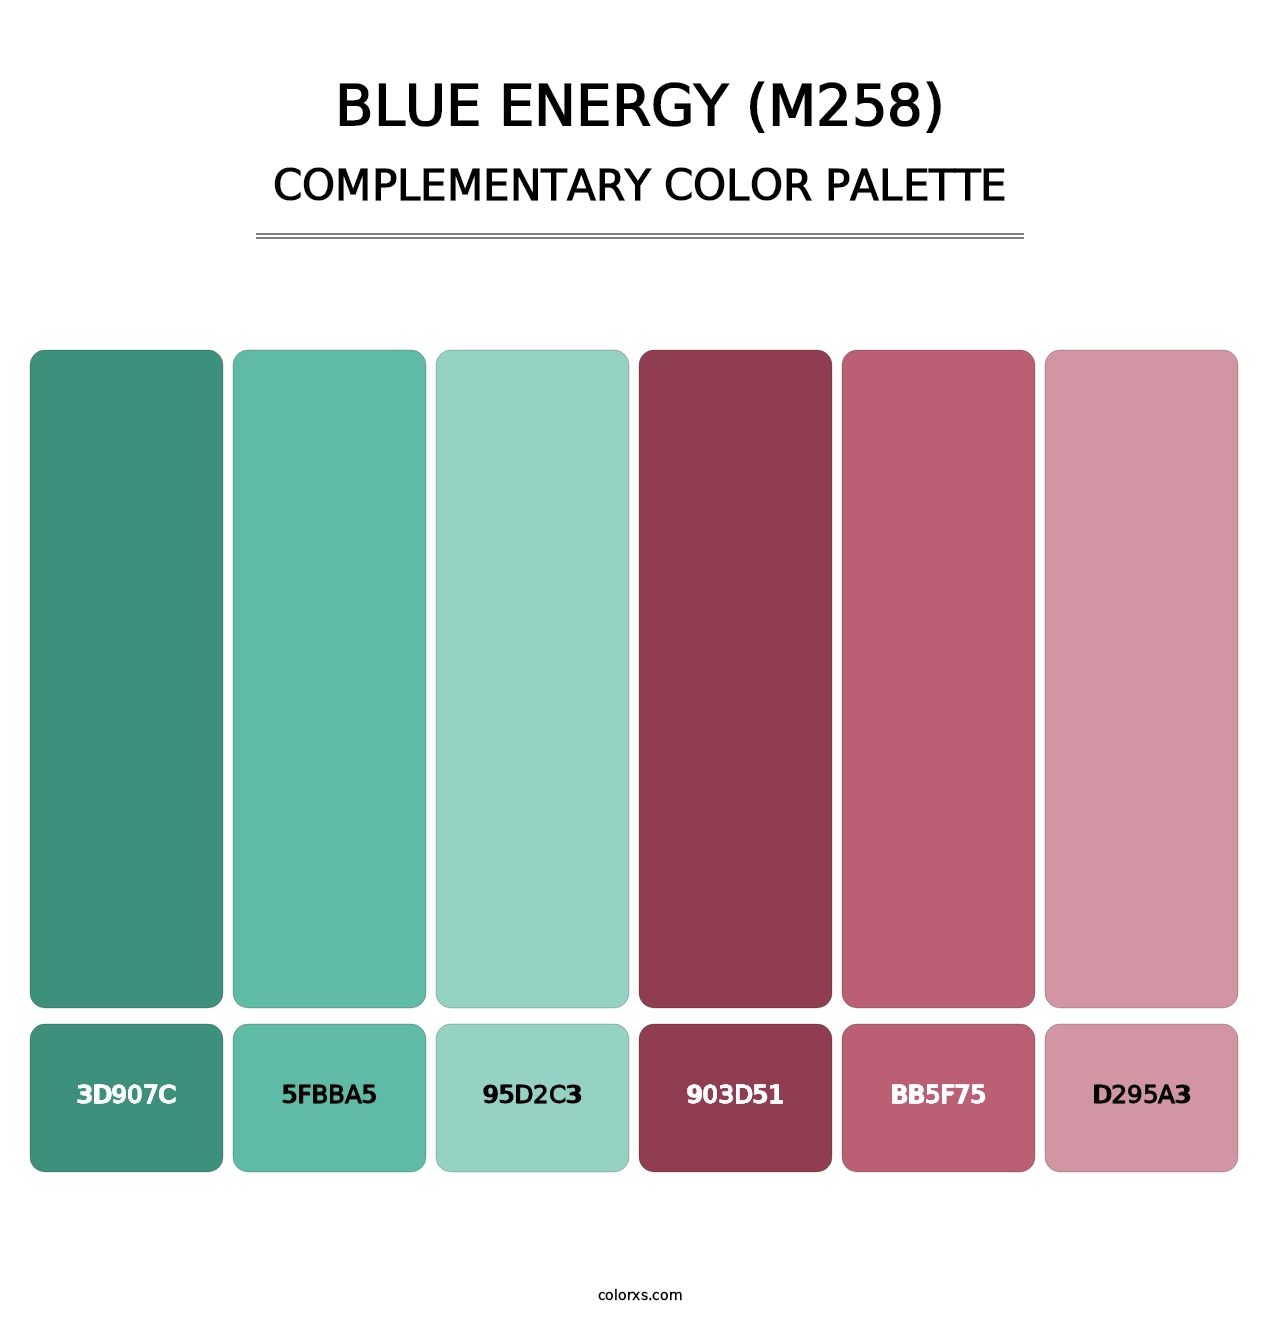 Blue Energy (M258) - Complementary Color Palette